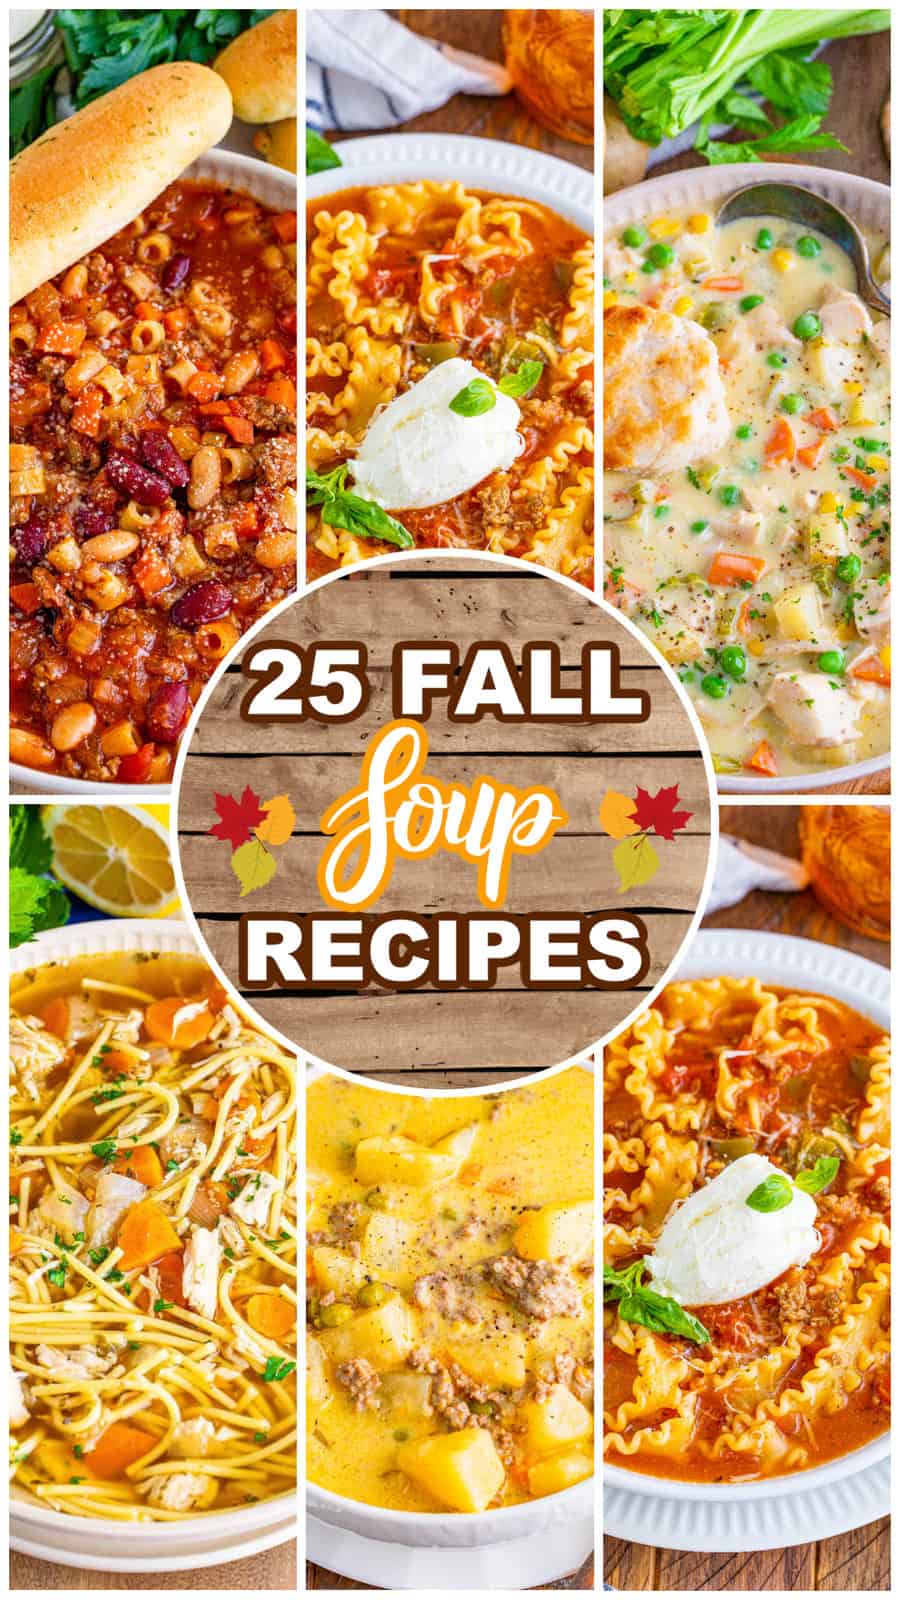 a collage of 6 photos of soups with a title in the center that says "25 Fall Soup Recipes". 